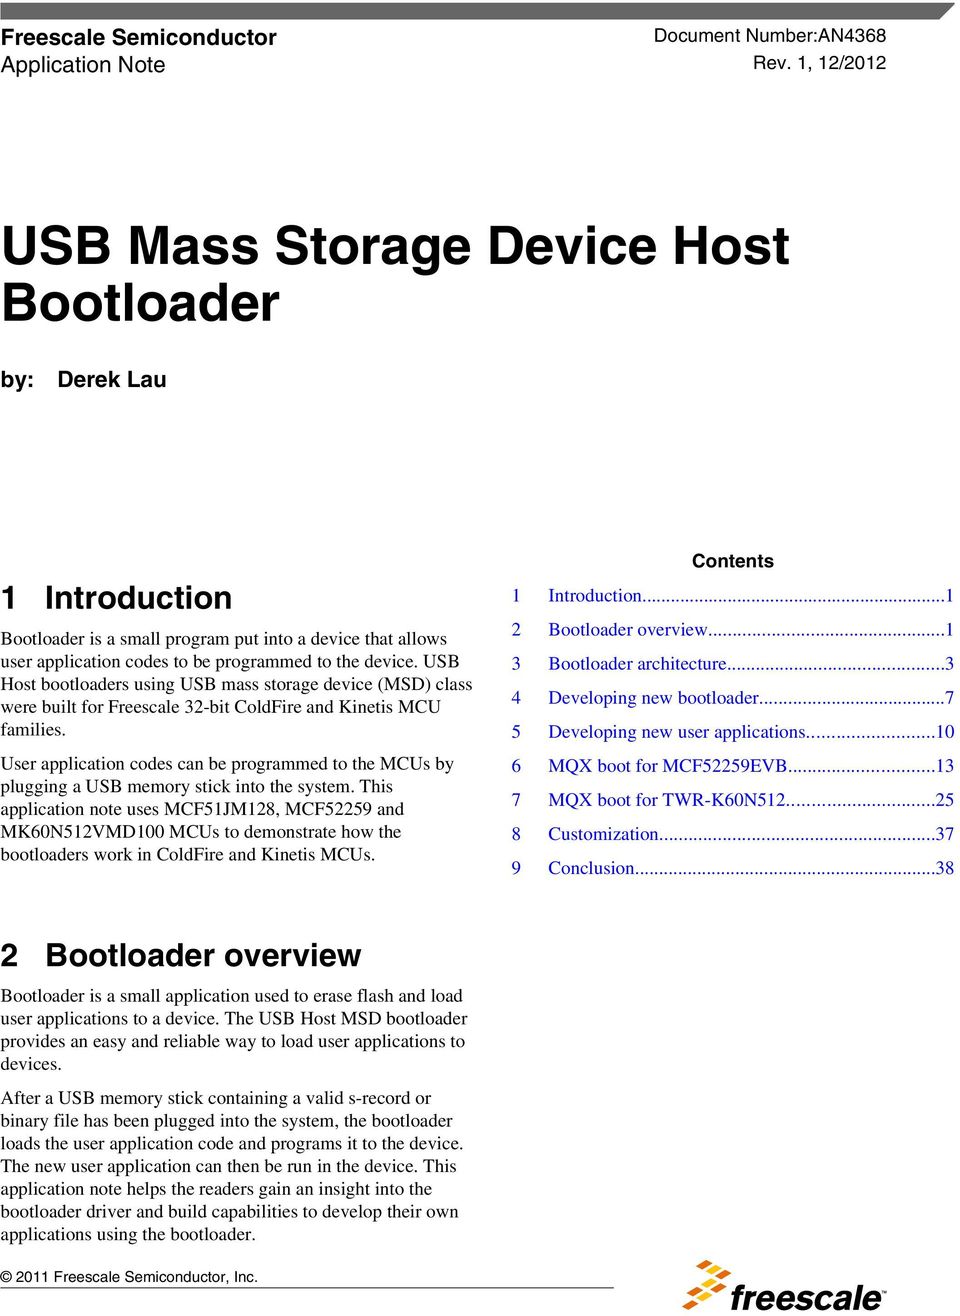 USB Host bootloaders using USB mass storage device (MSD) class were built for Freescale 32-bit ColdFire and Kinetis MCU families.